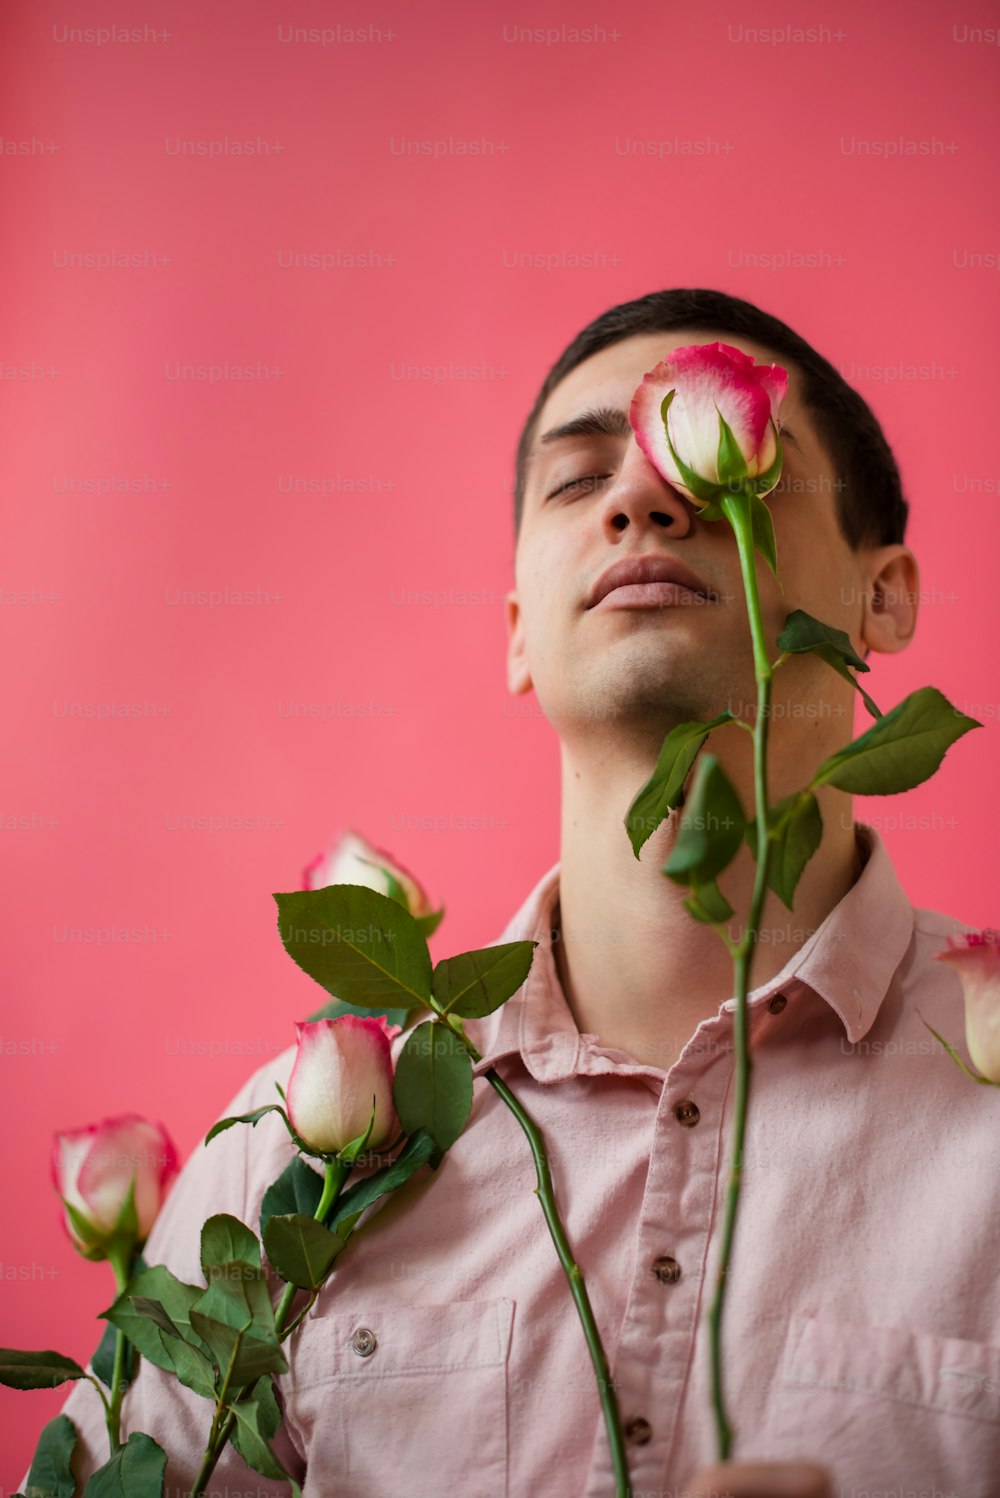 a man holding a bunch of roses in front of his face